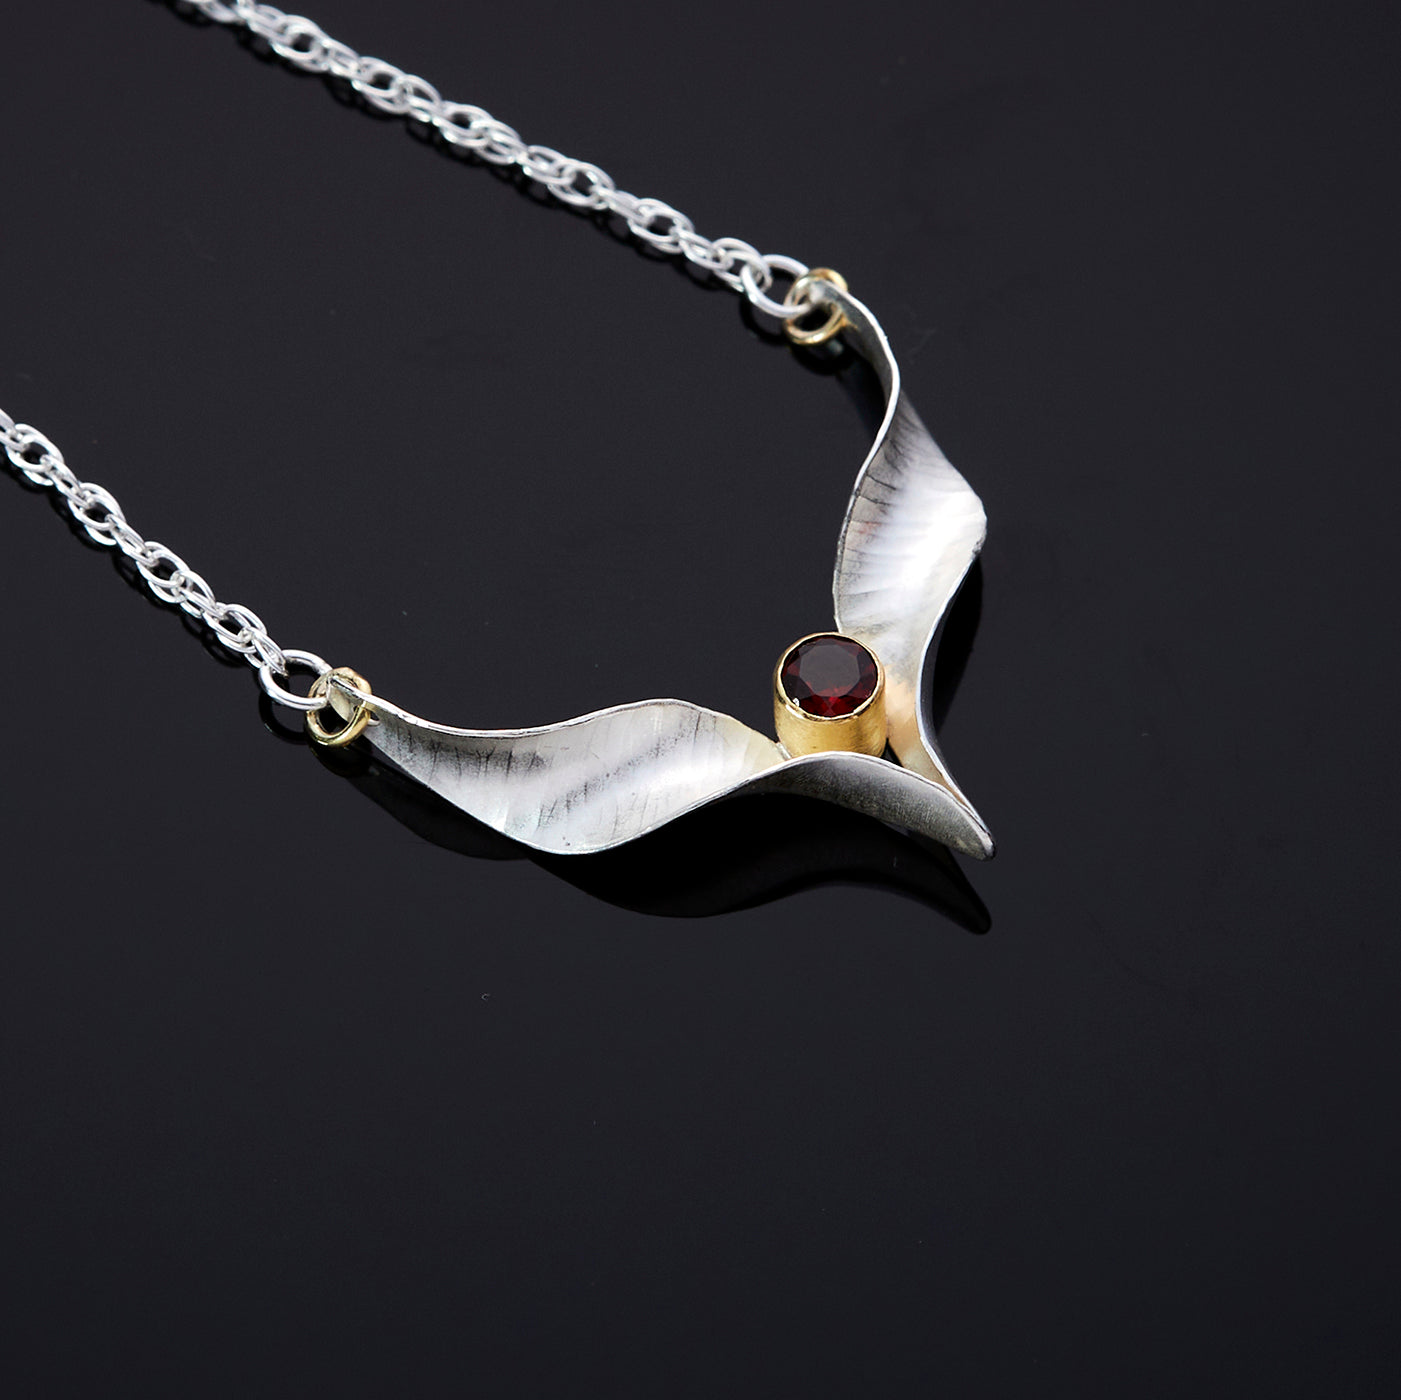 Wings silver necklace